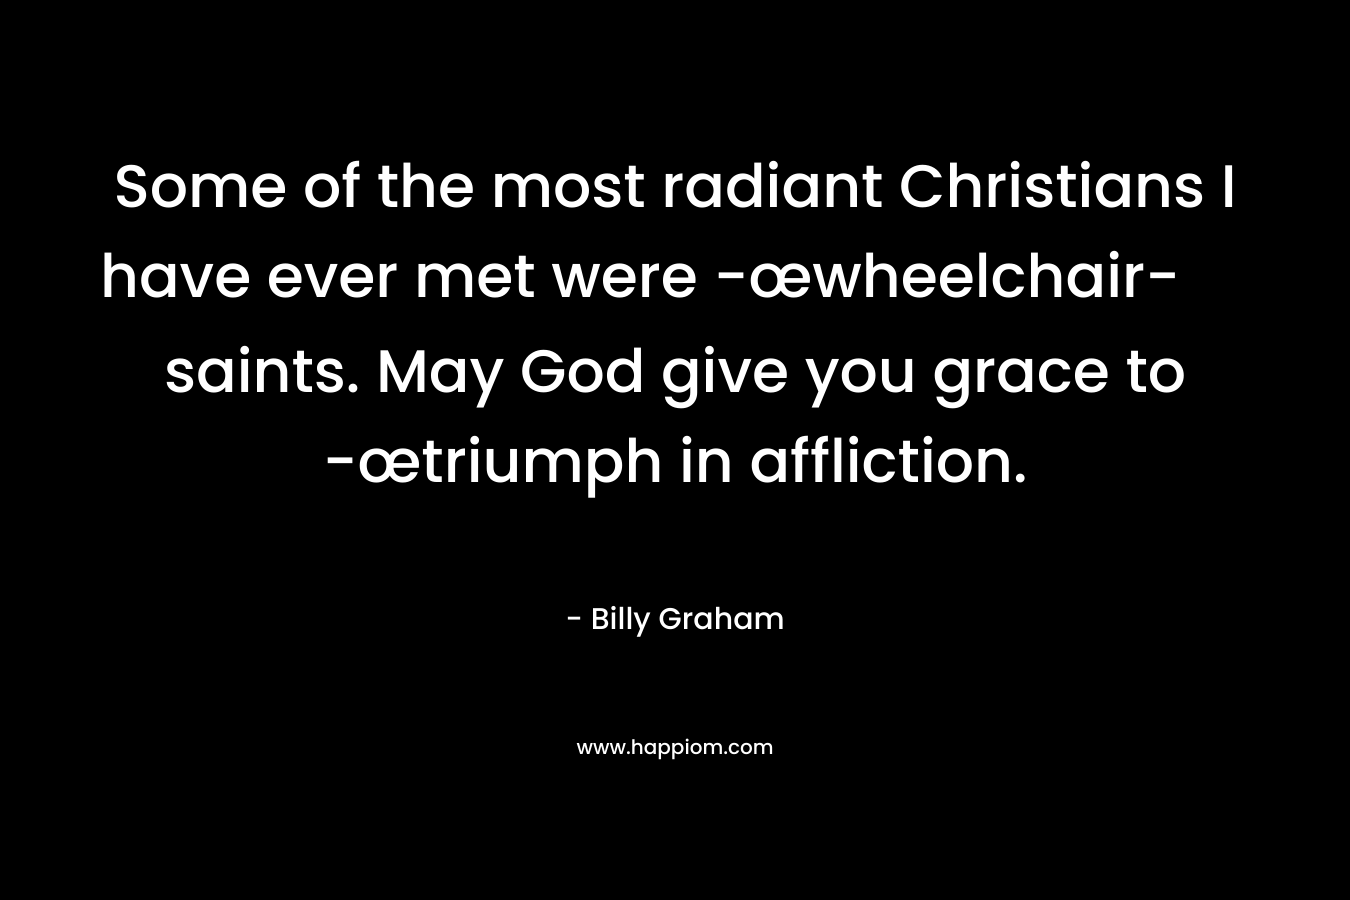 Some of the most radiant Christians I have ever met were -œwheelchair- saints. May God give you grace to -œtriumph in affliction. – Billy Graham